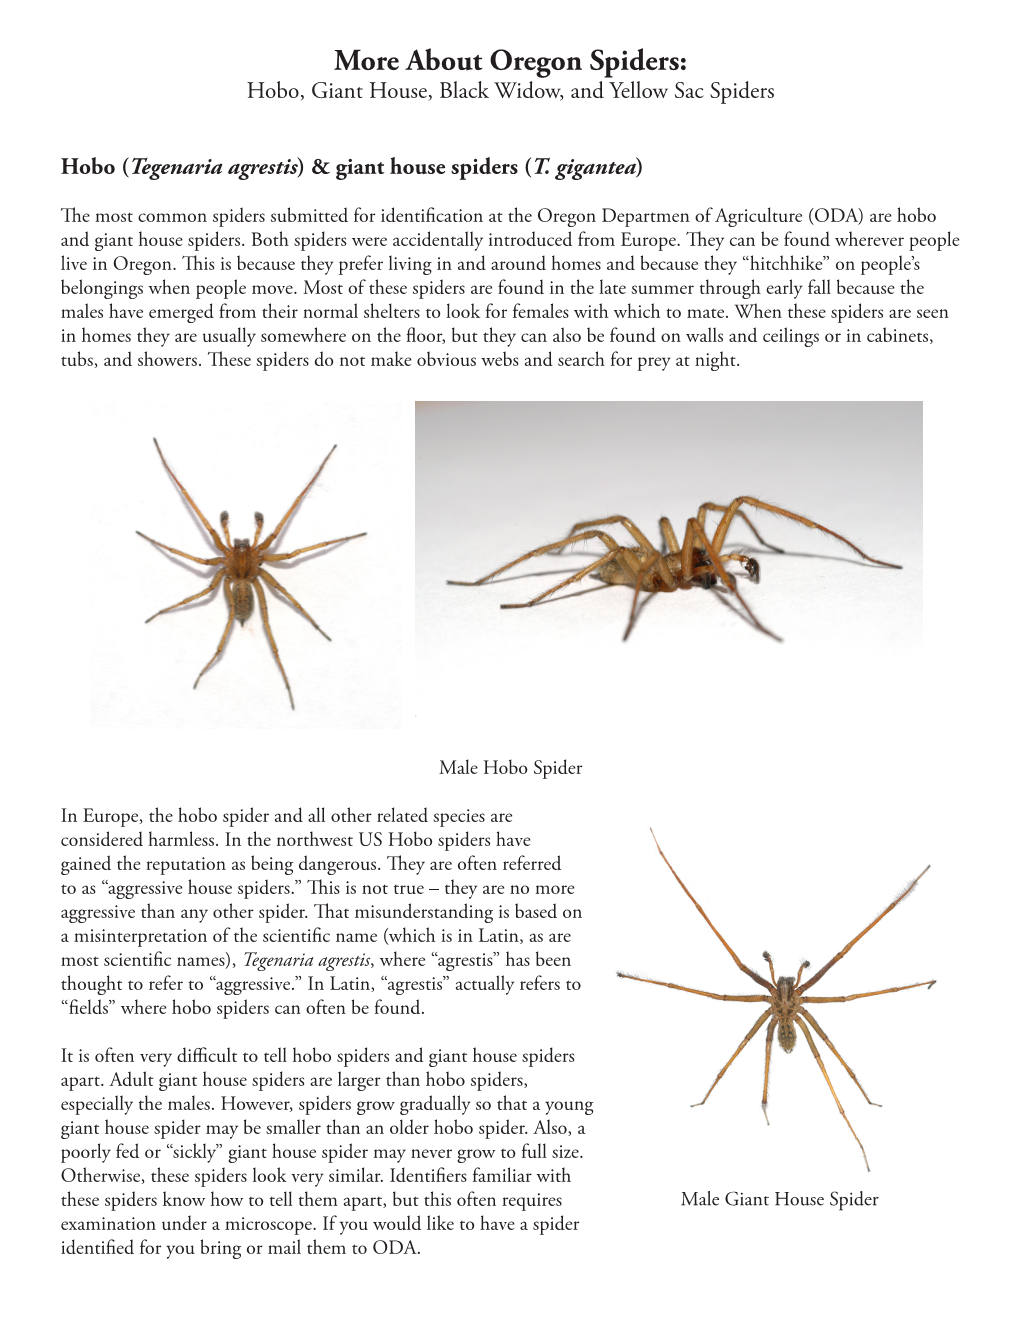 About Oregon Spiders: Hobo, Giant House, Black Widow, and Yellow Sac Spiders